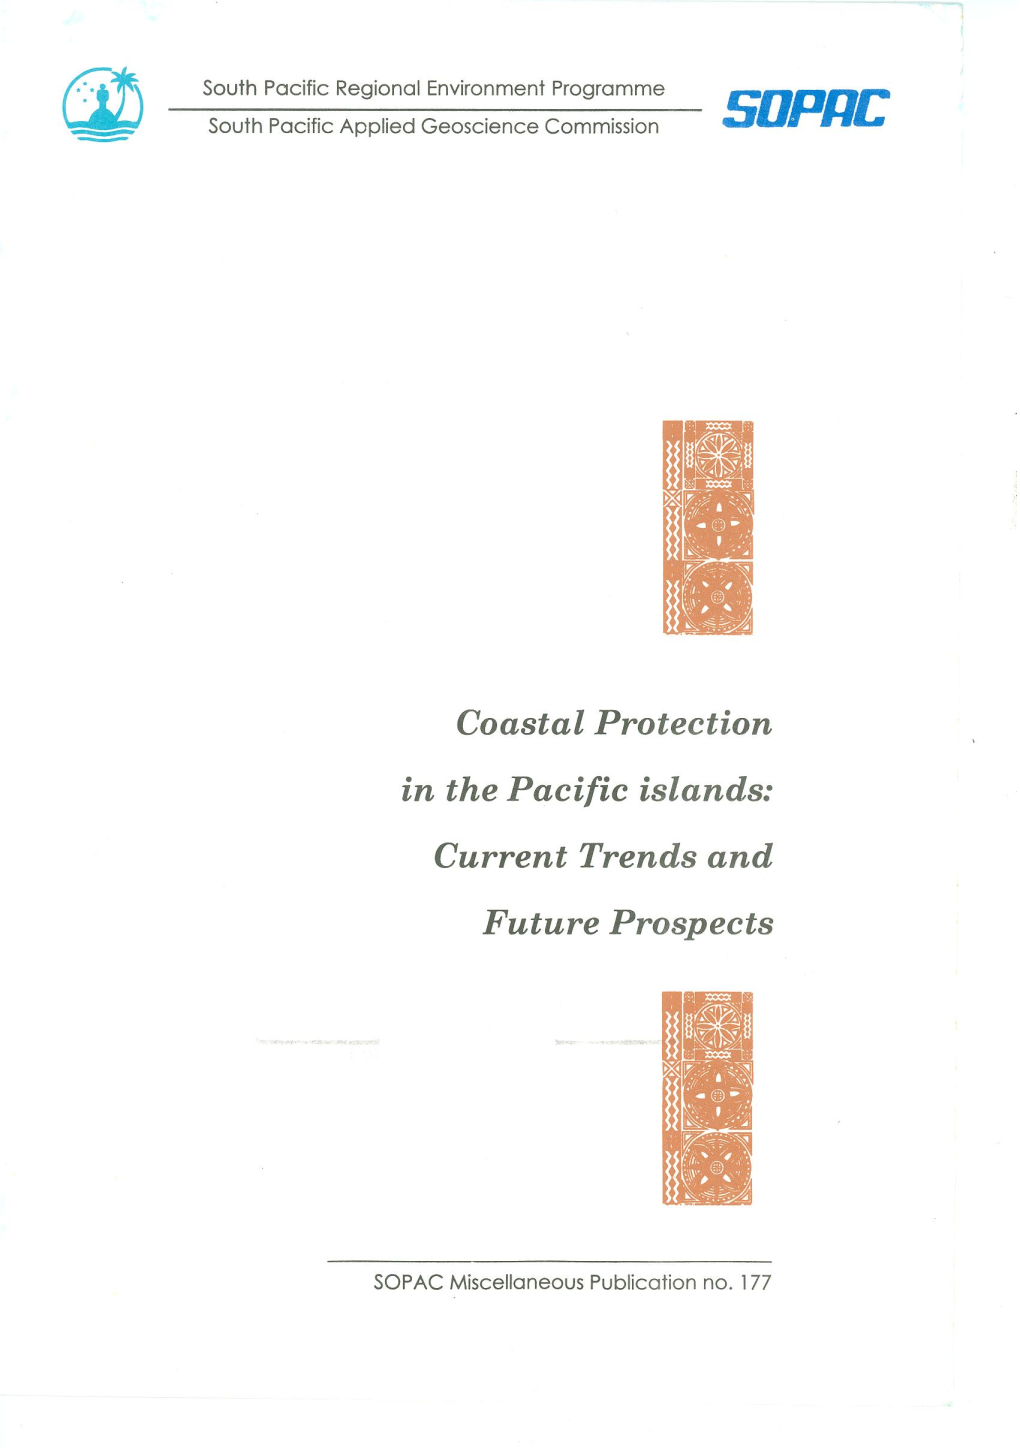 Coastal Protection in the Pacific Islands: Current Trends and Future Prospects